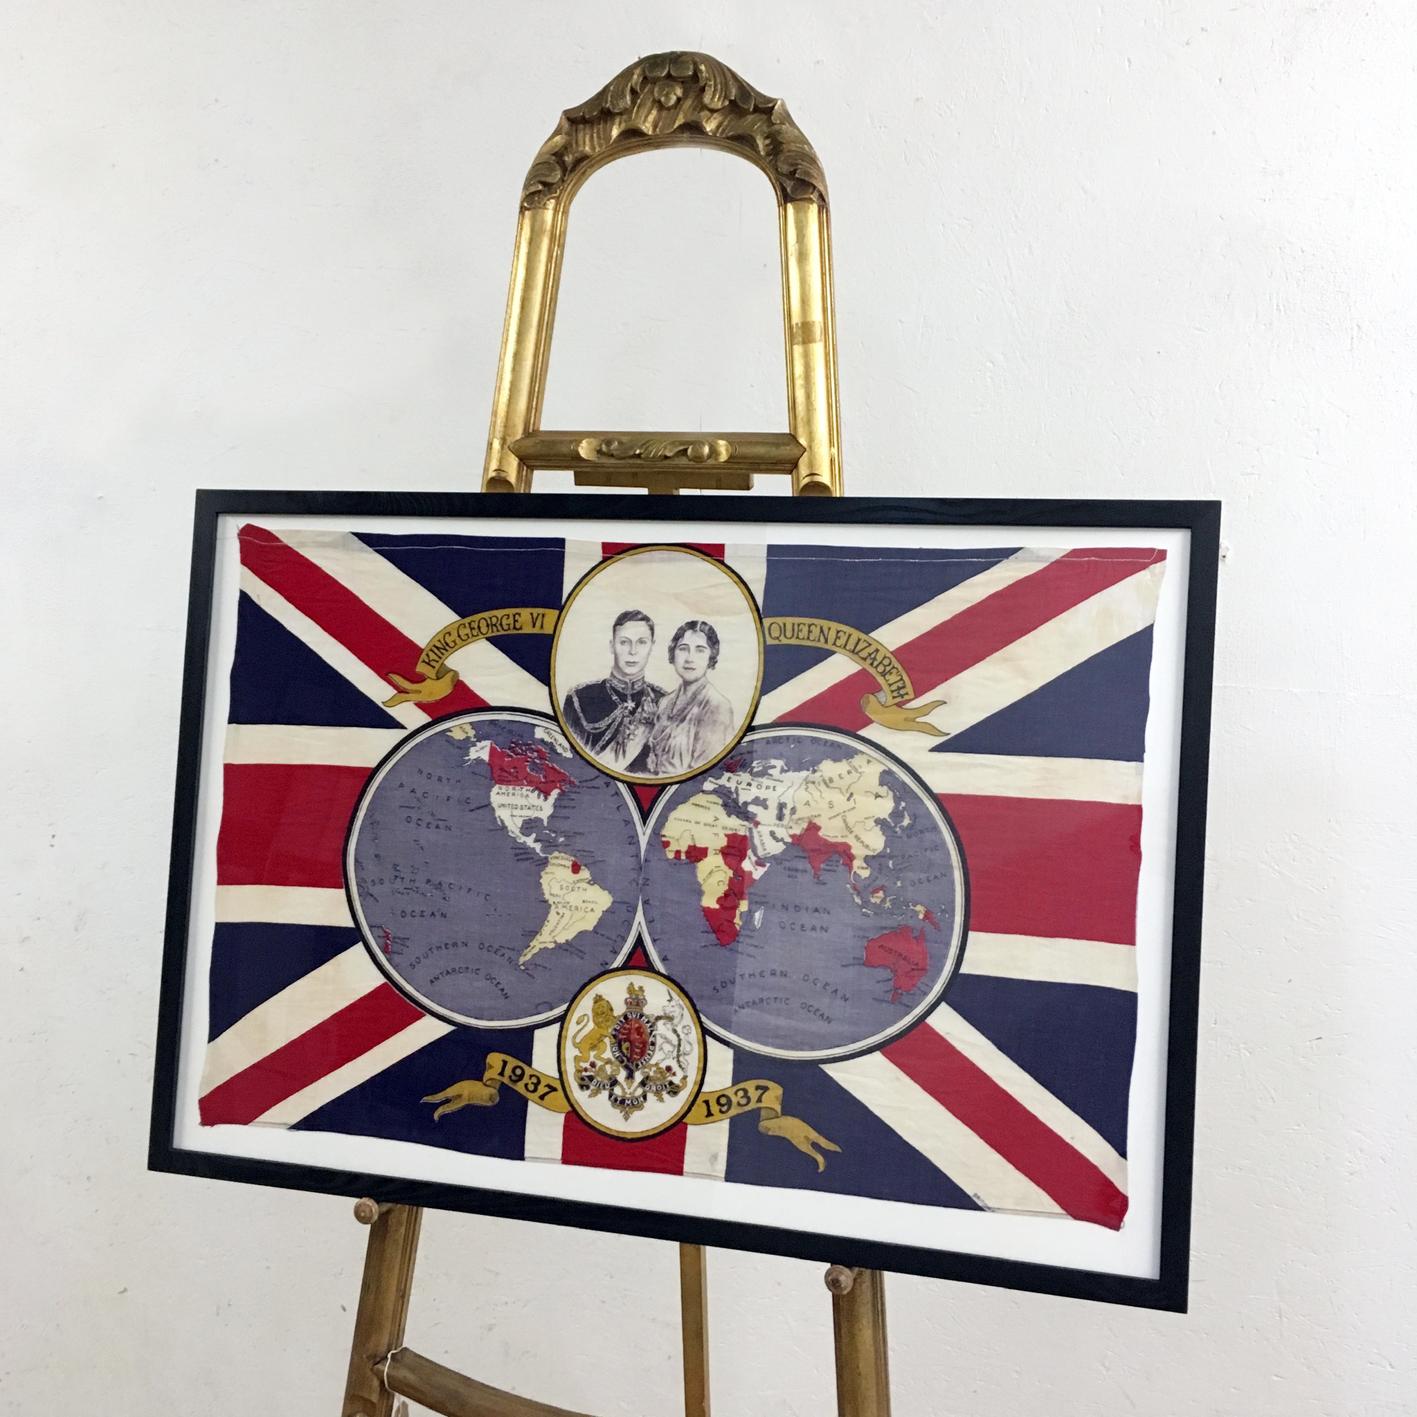 1937 King George VI Coronation framed flag

This is a vintage and original flag made for the coronation, Street Parties And Celebrations In 1937

There are some age related marks as expected with age and use

Frame size: 83cm x 56cm x